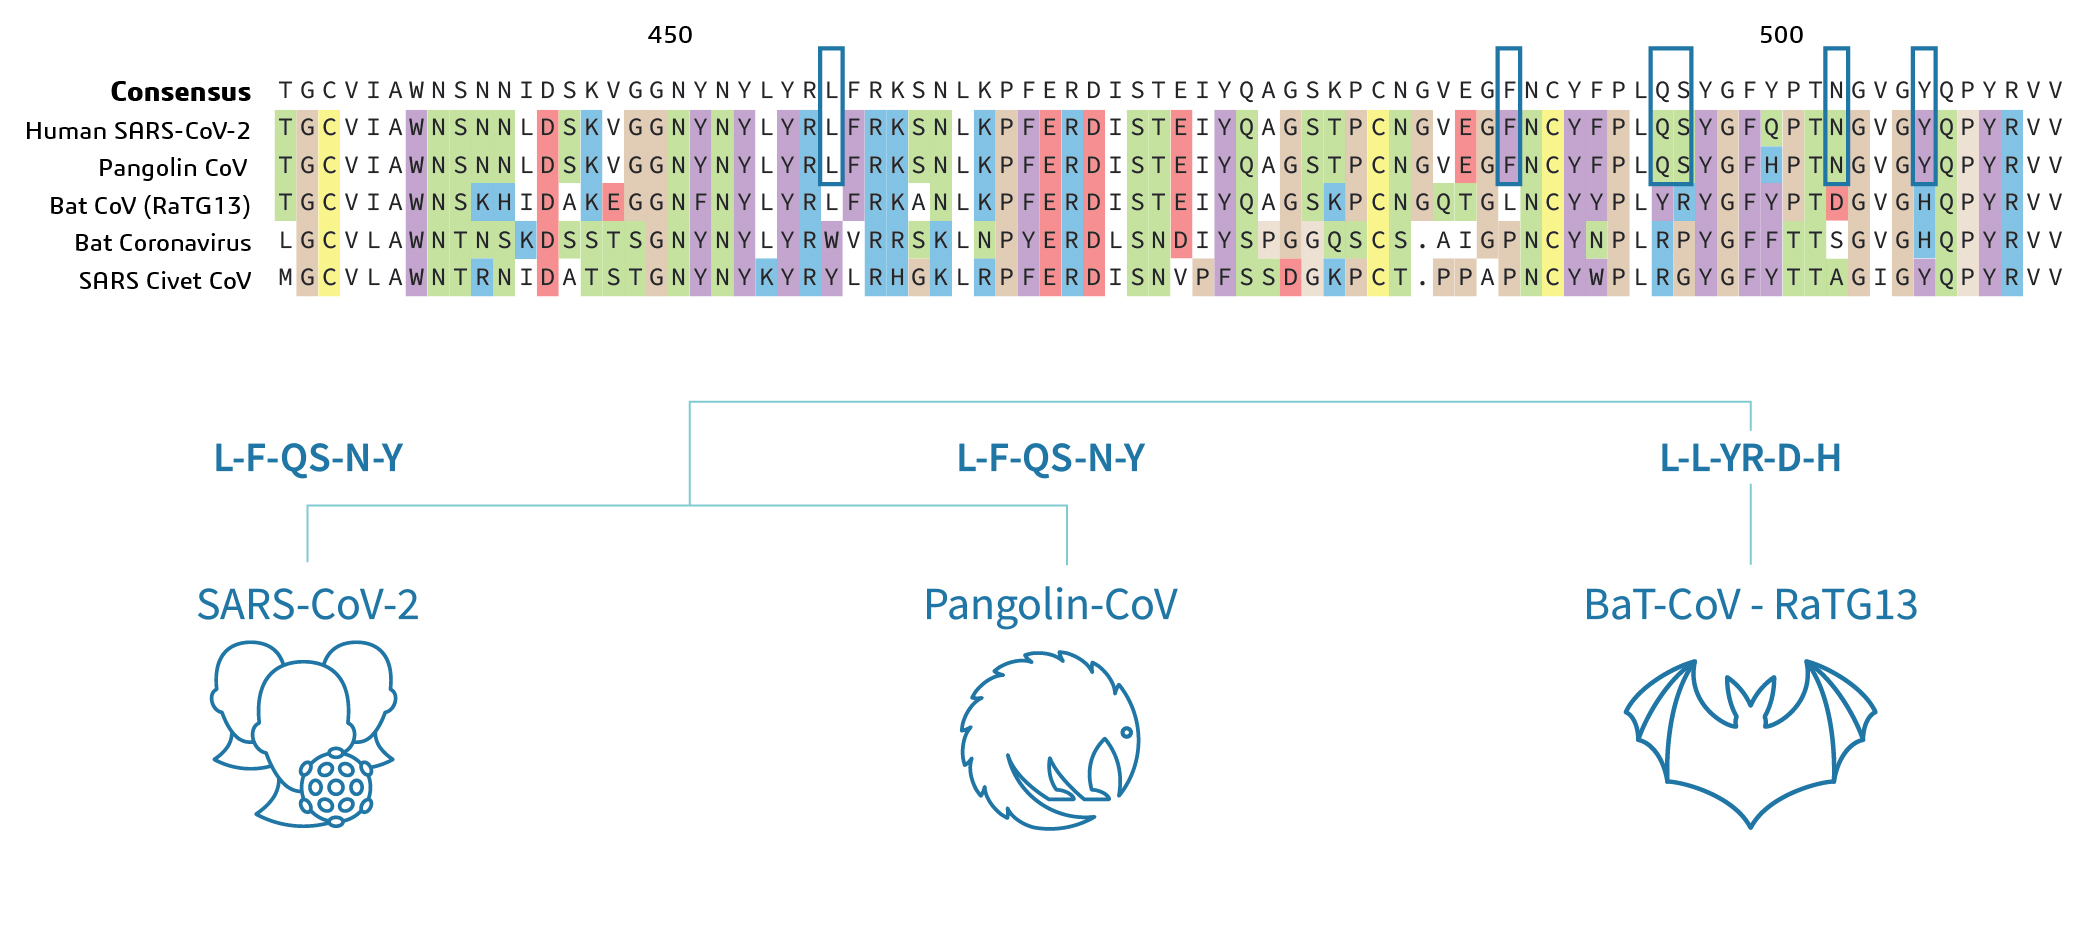 Multiple sequence alignment of Spike protein of Human, Pangolin and Bat SARS-CoV-2.